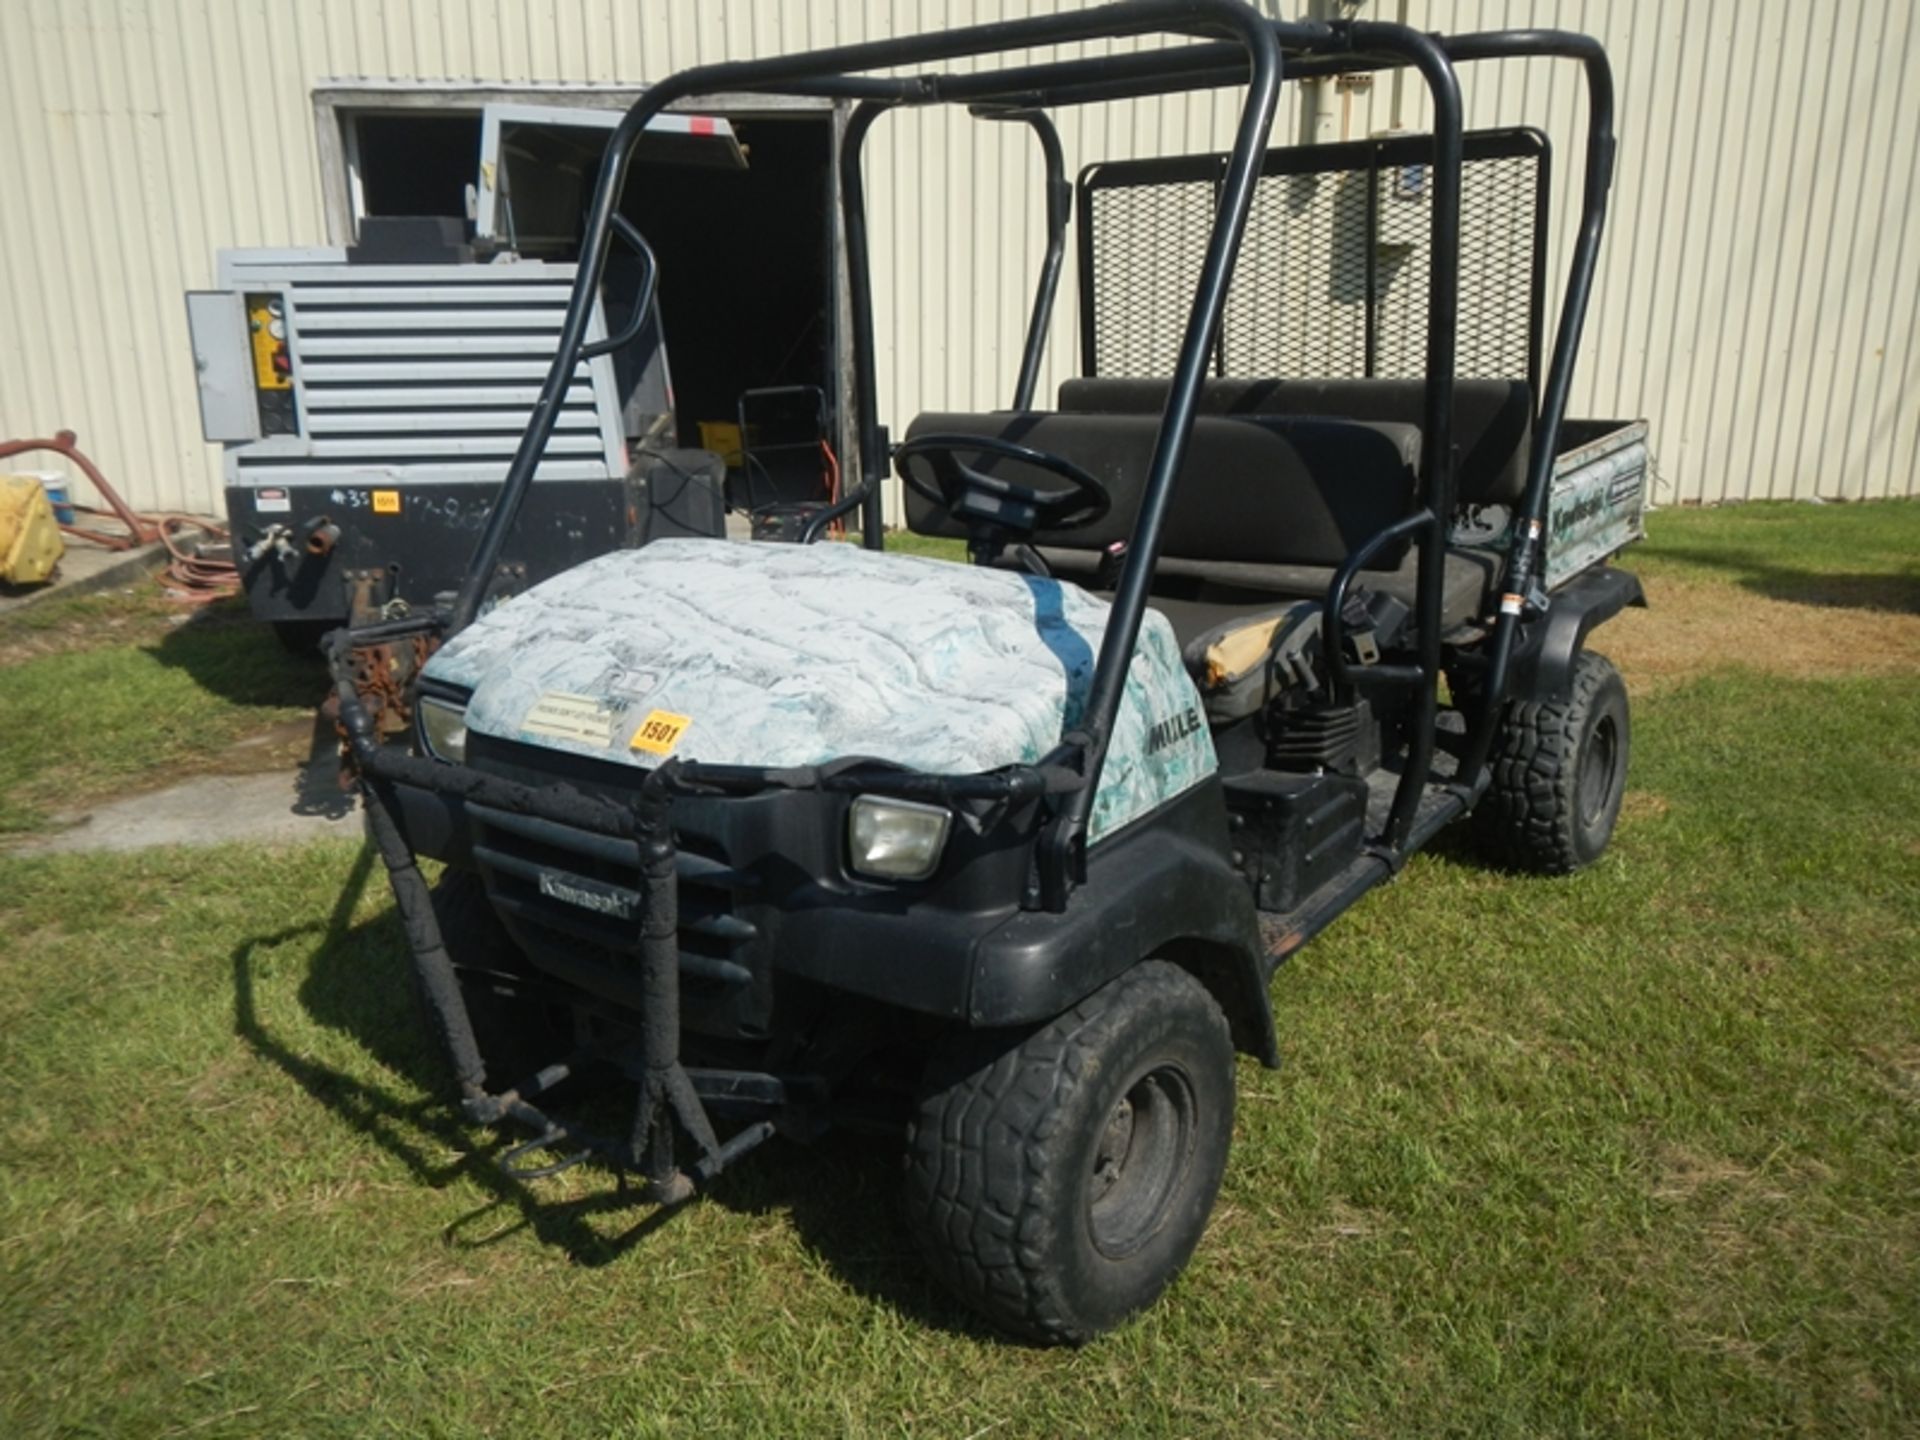 KAWASAKI Mule 3110 2-row seating w/dump body (has cooling system issues water will air lock and